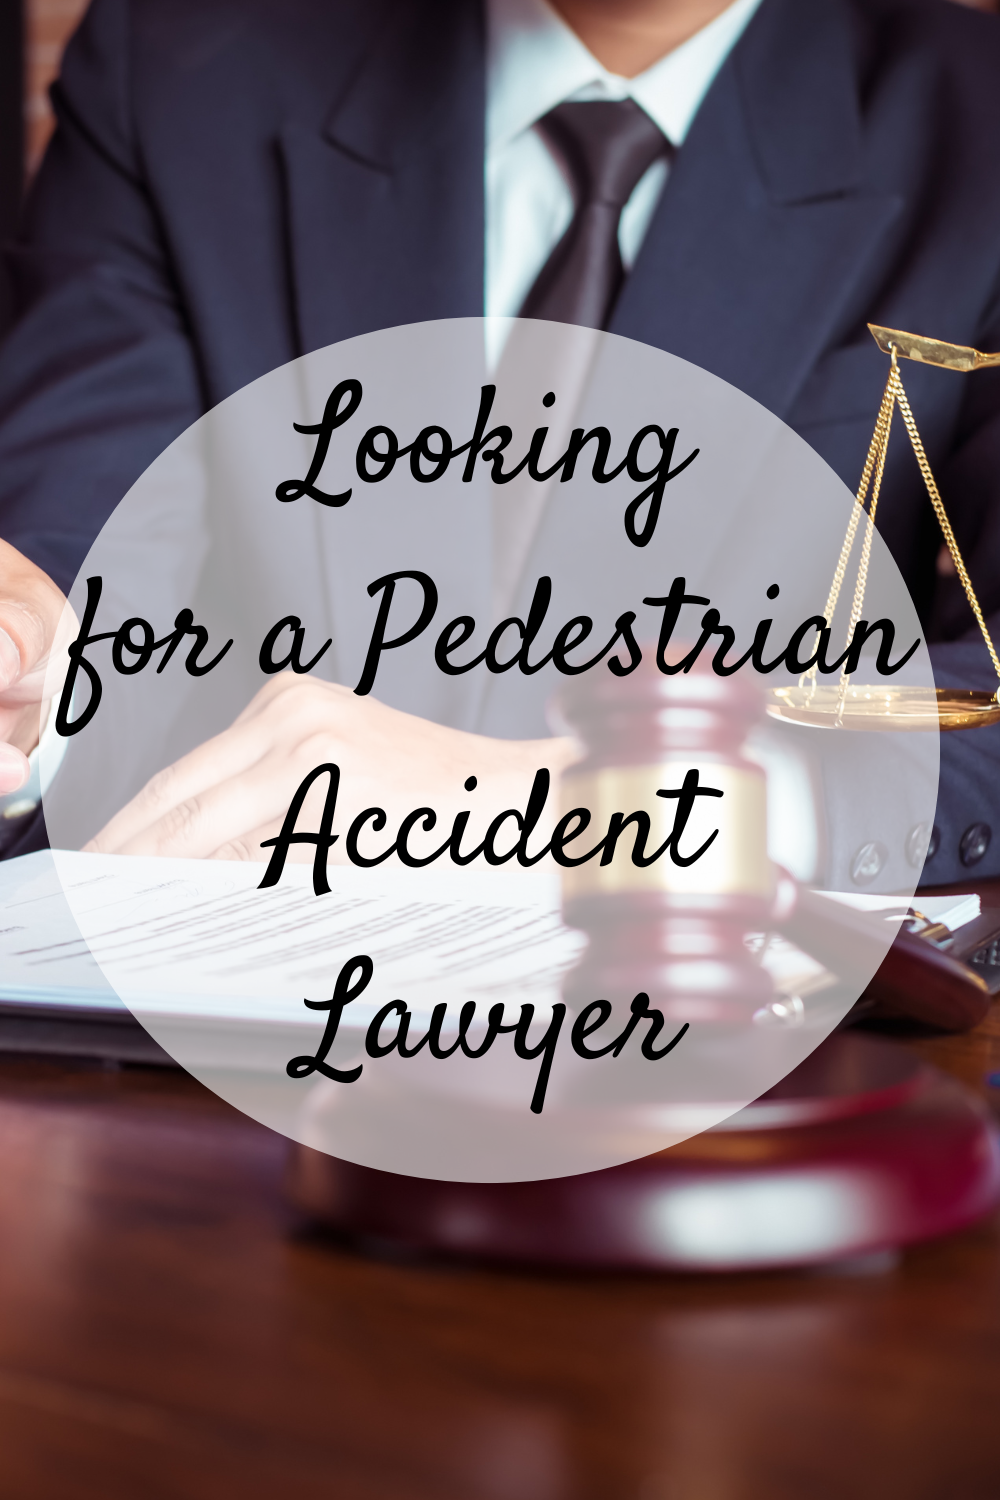 Looking for a Pedestrian Accident Lawyer